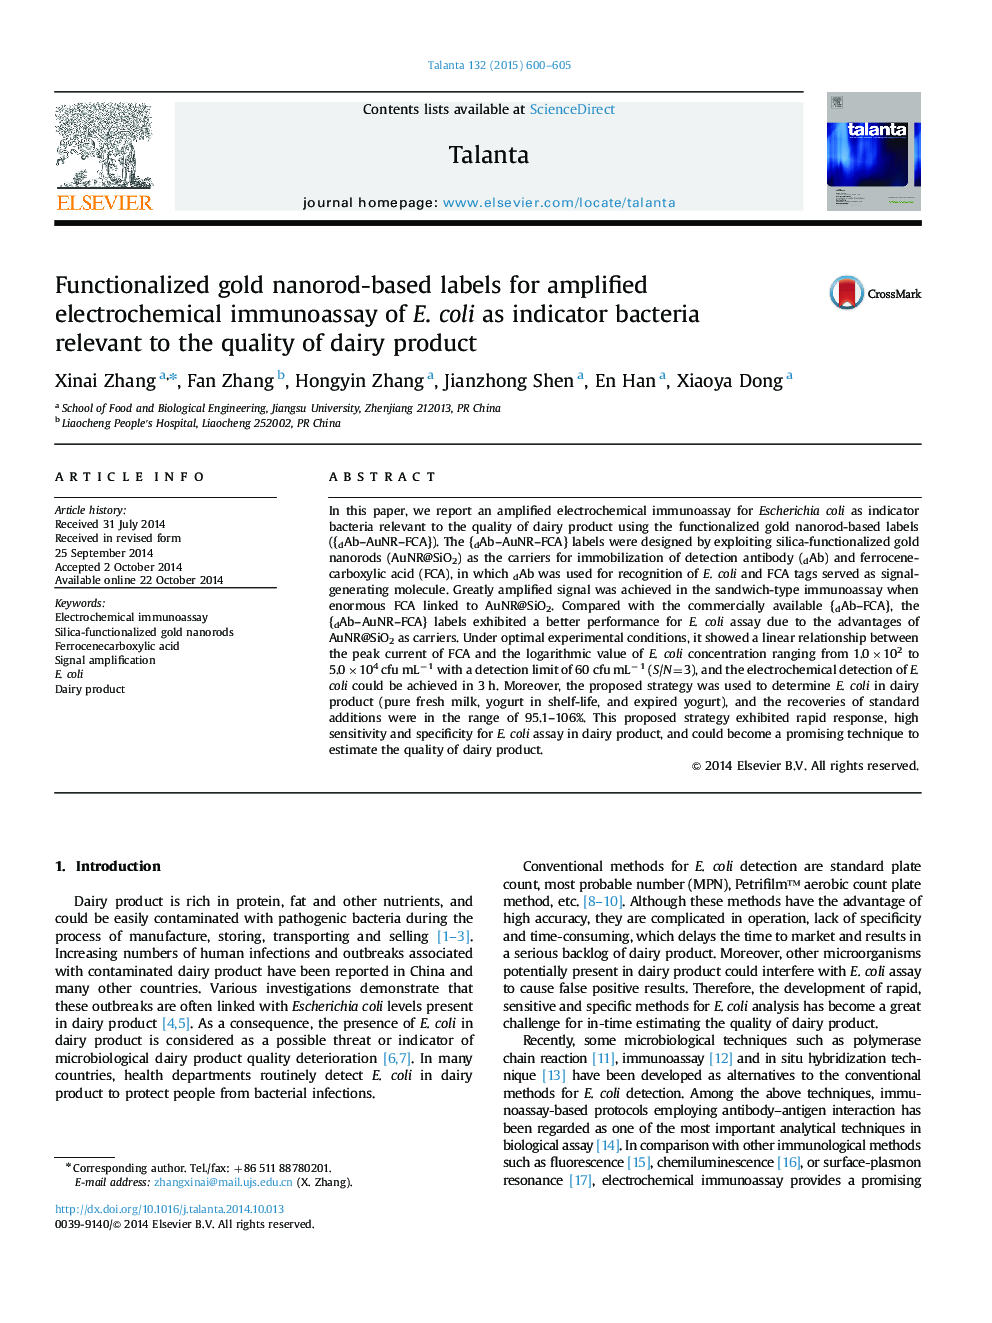 Functionalized gold nanorod-based labels for amplified electrochemical immunoassay of E. coli as indicator bacteria relevant to the quality of dairy product